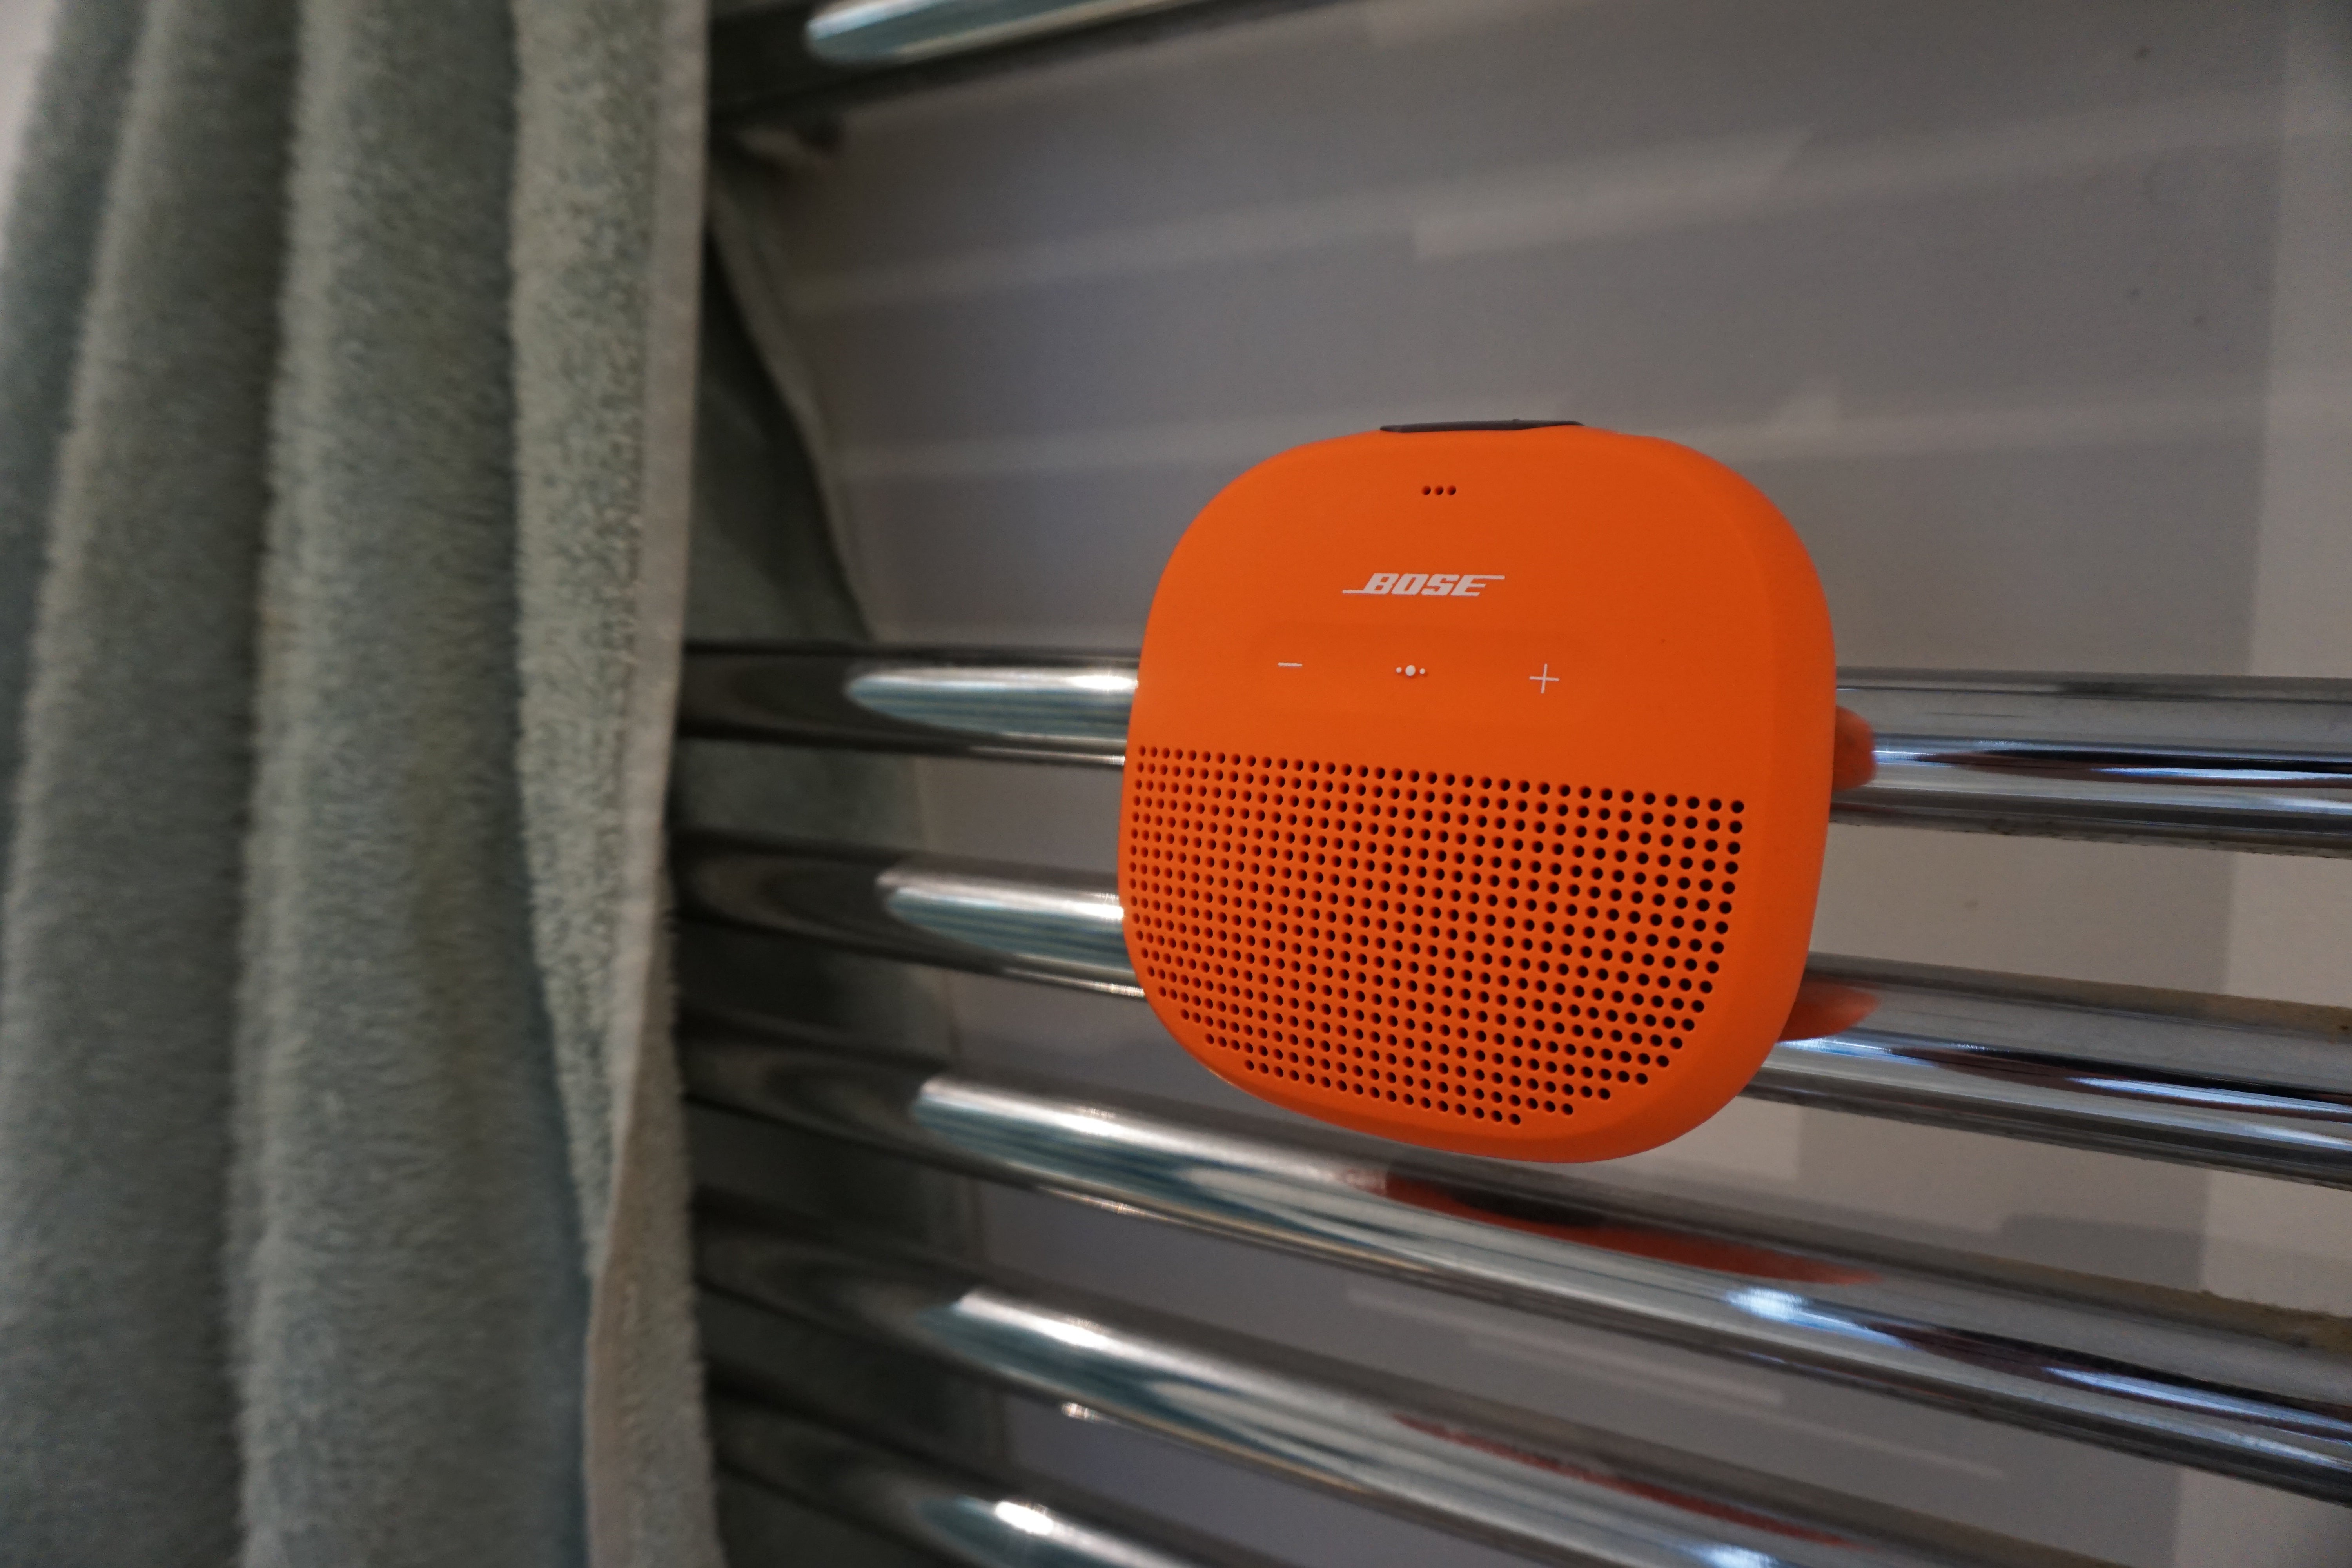 Bose SoundLink Micro speaker attached to metal rack.